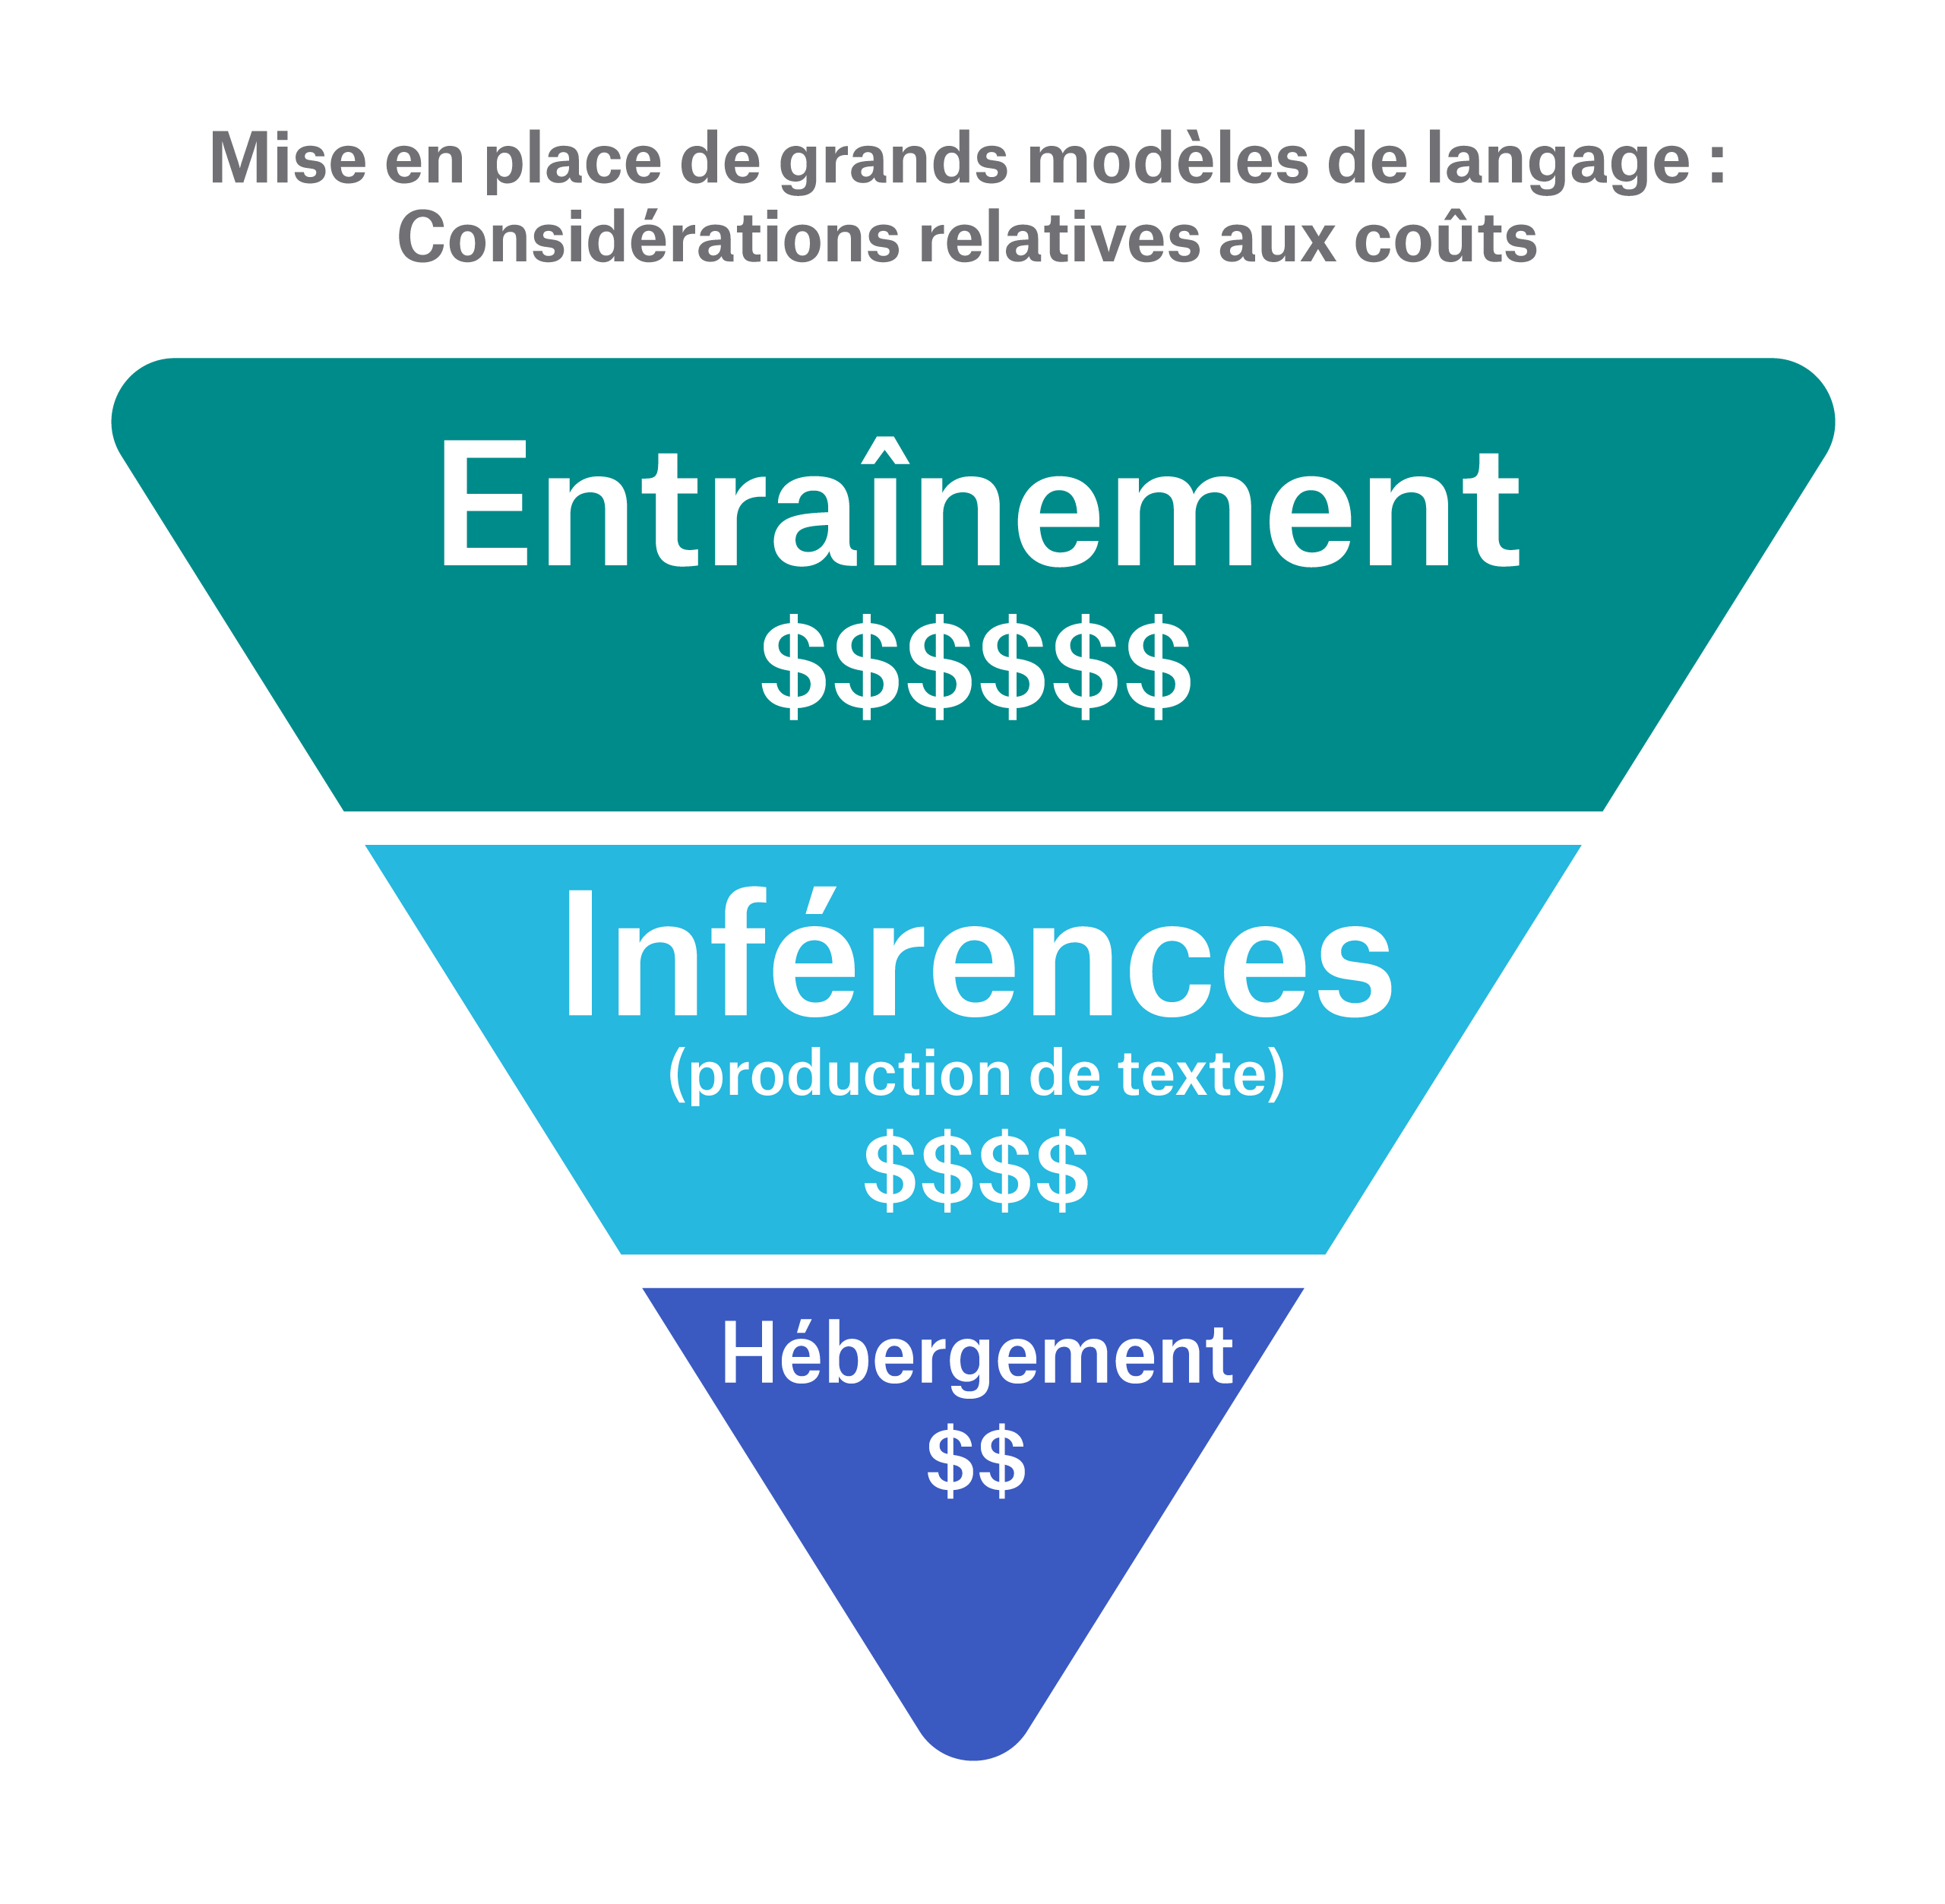 Graphic of a triangle cut into three pieces to depict the cost considerations of implementing LLMs